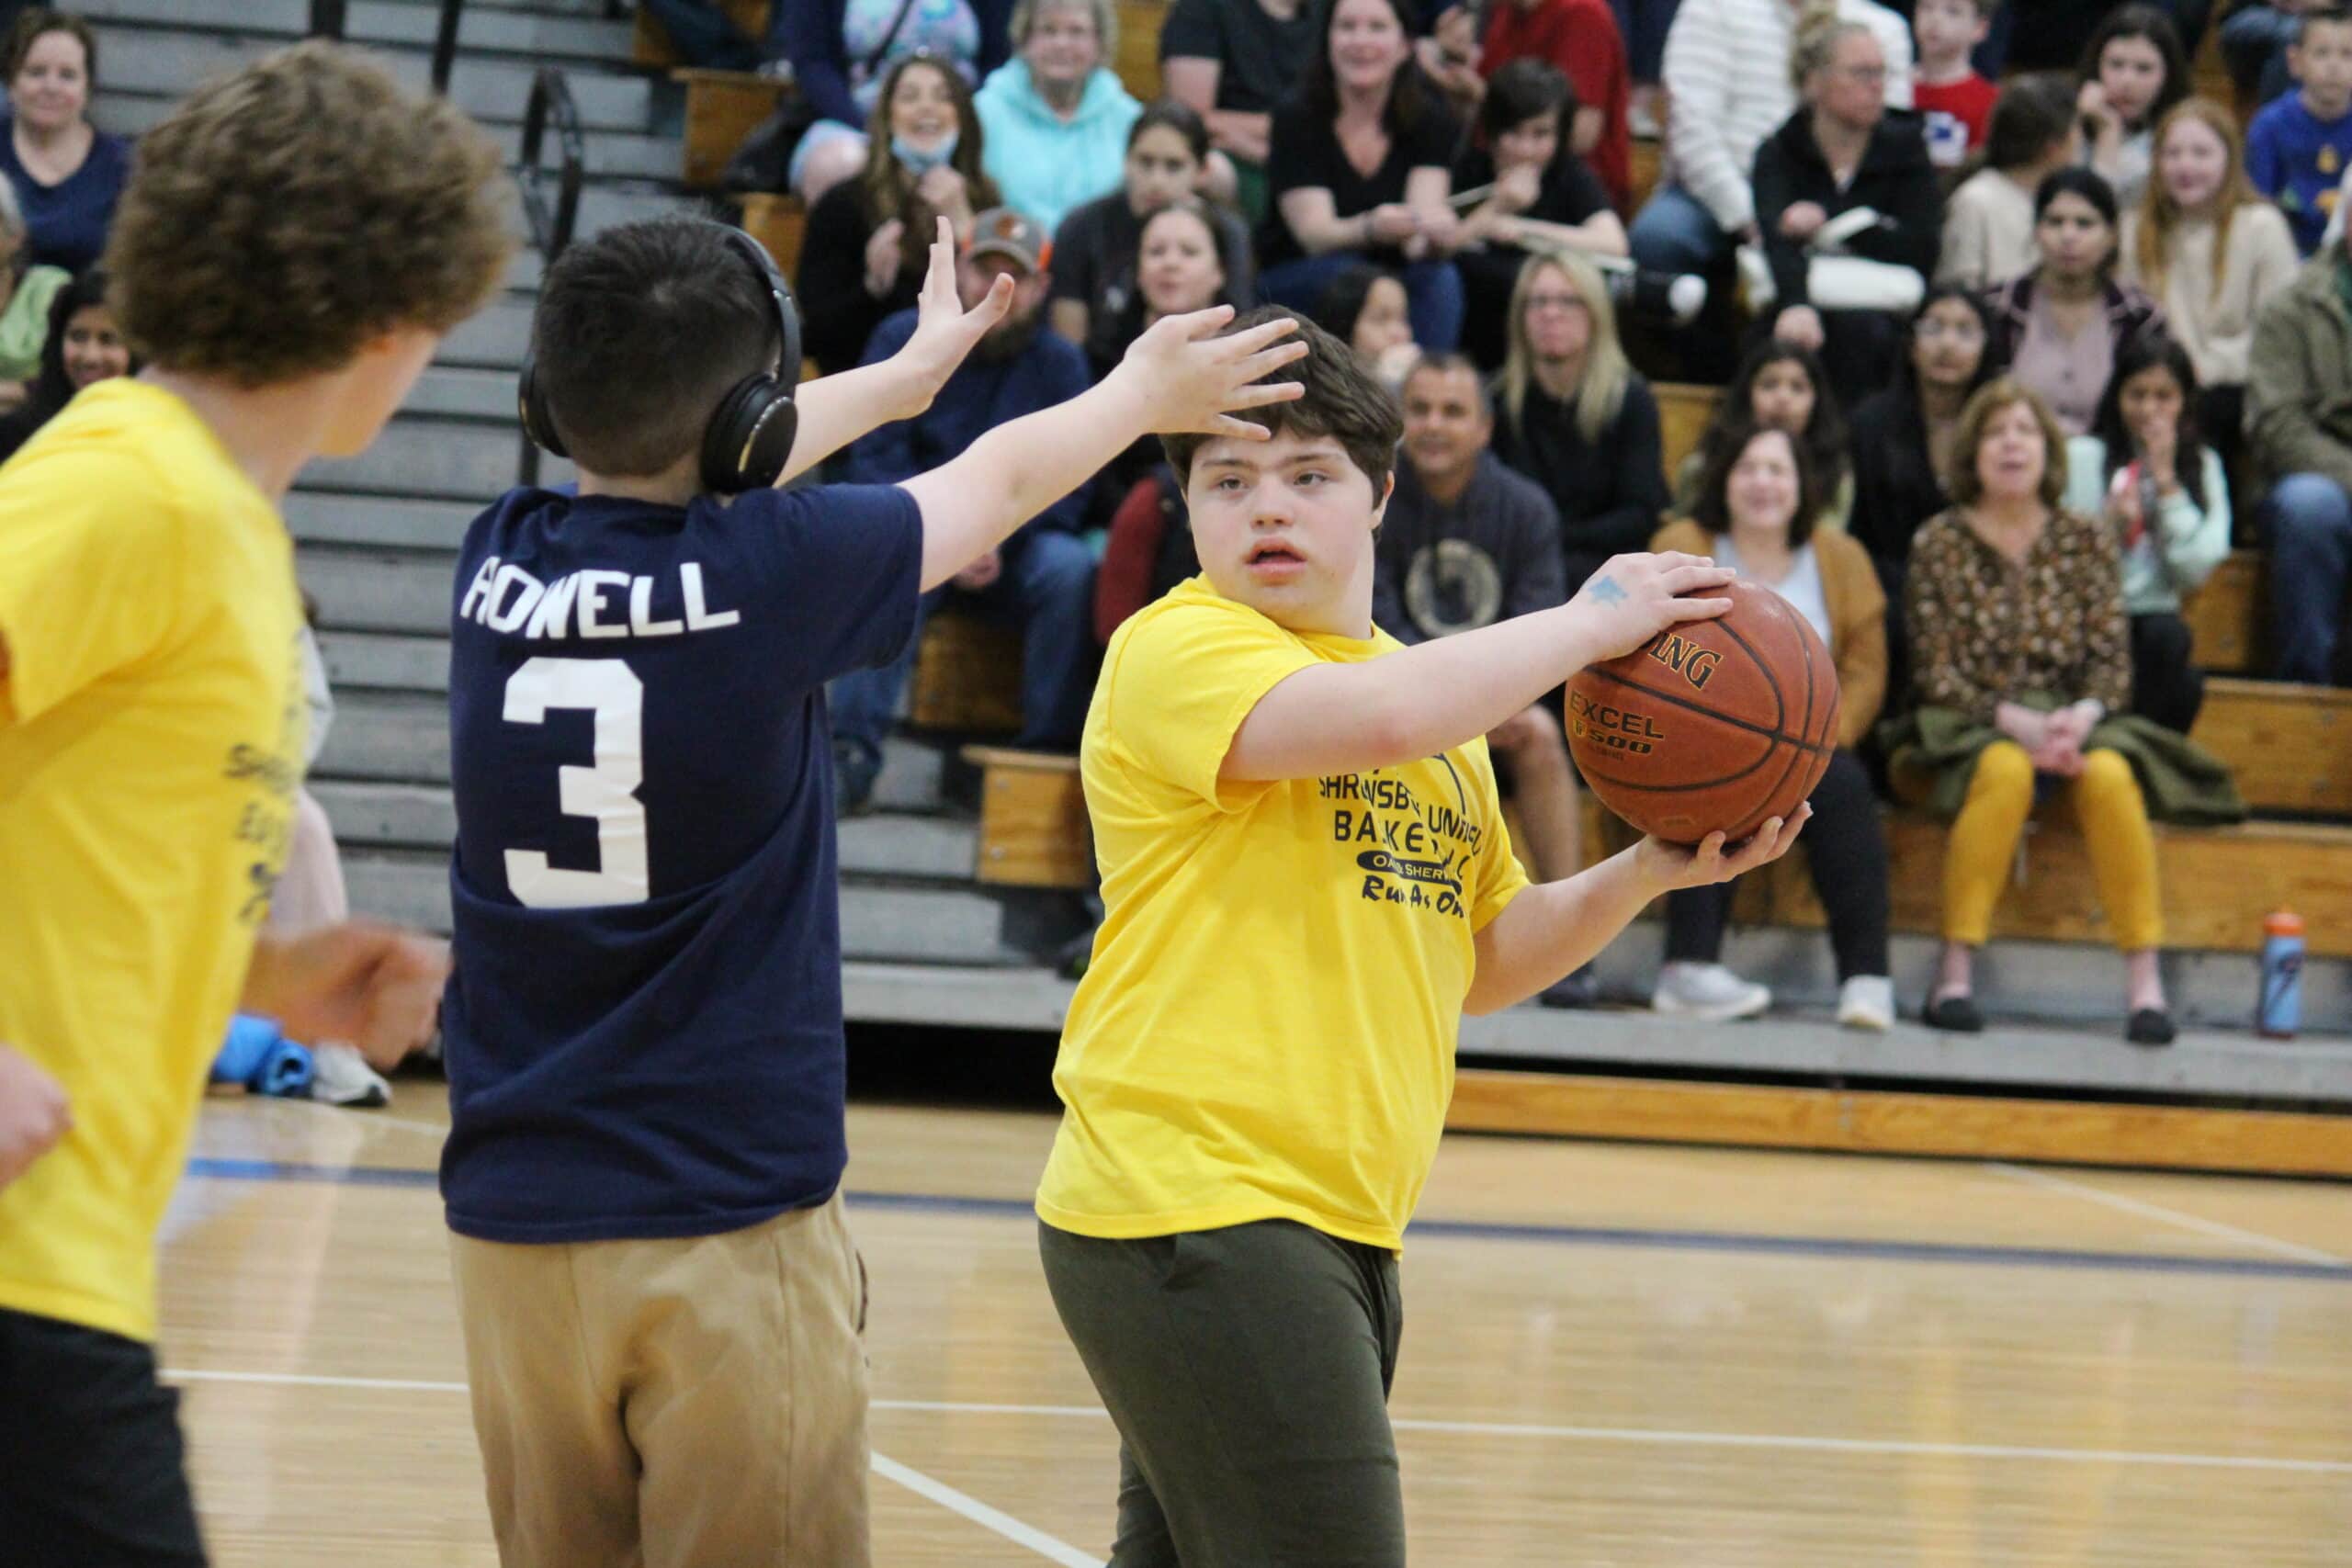 Shrewsbury Unified Basketball returns for intra-squad match